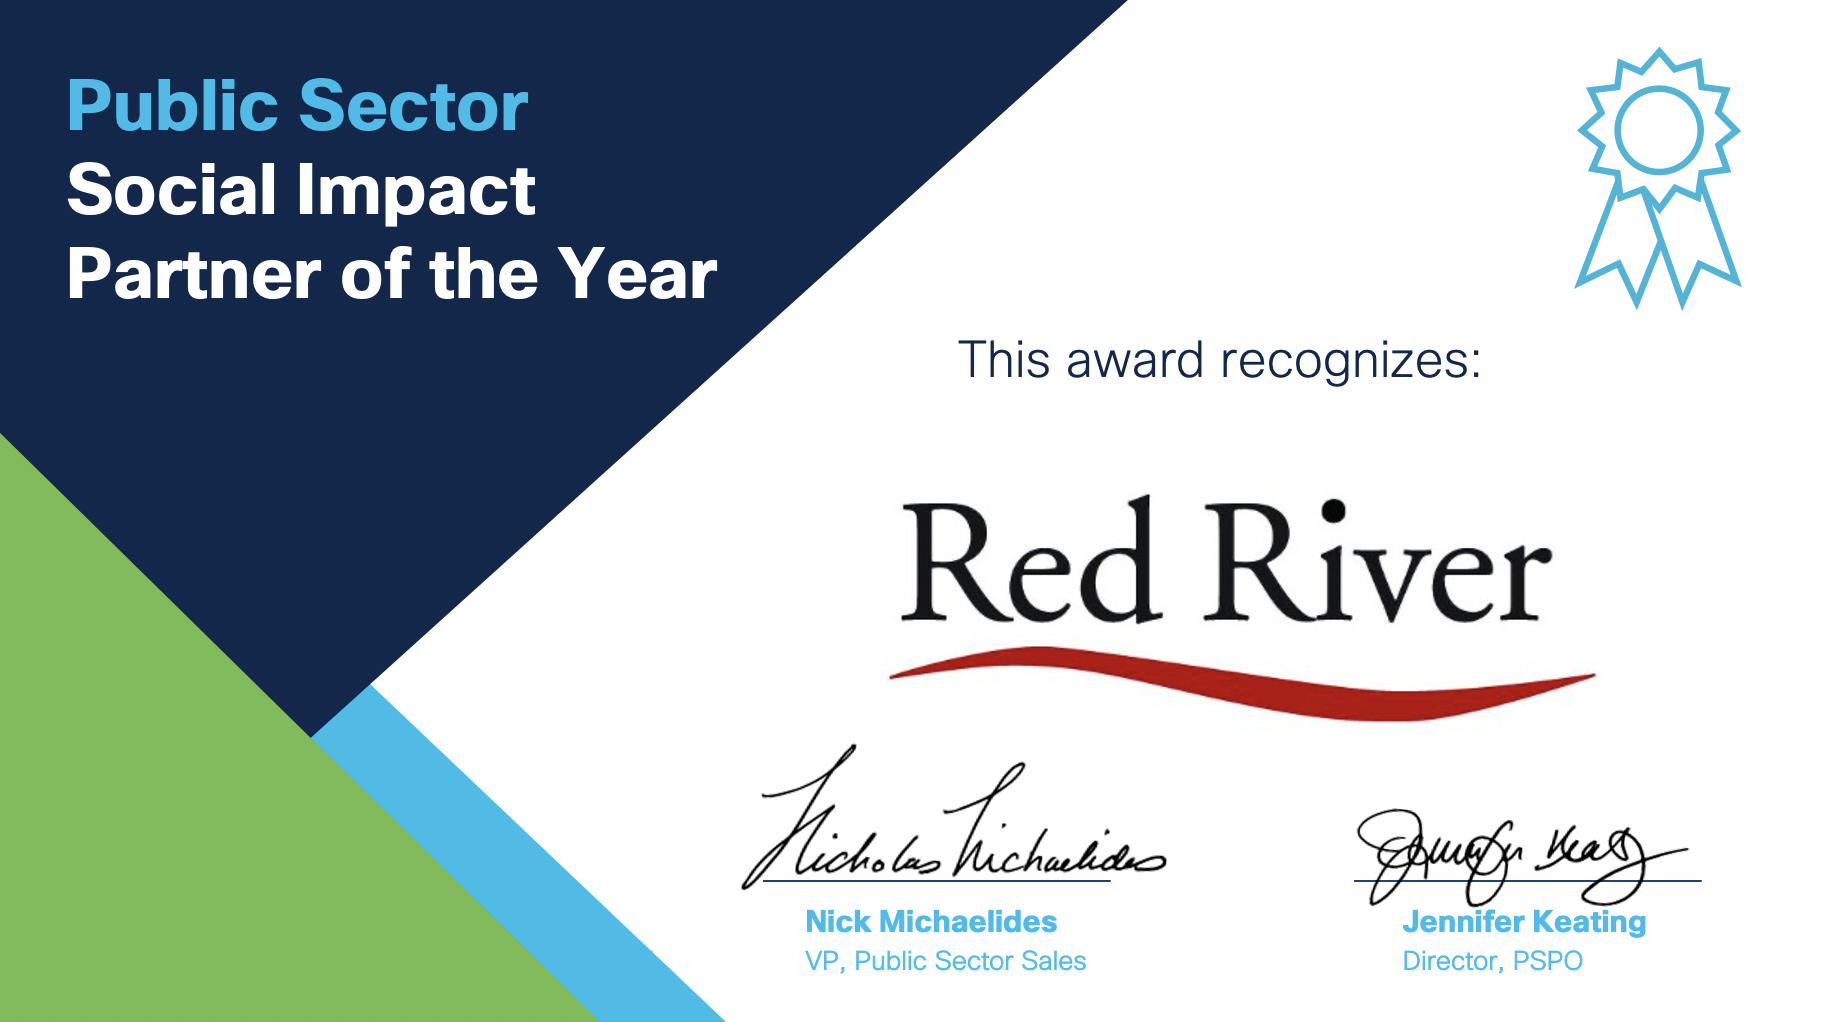 Cisco Names Red River Public Sector Social Impact Partner of the Year